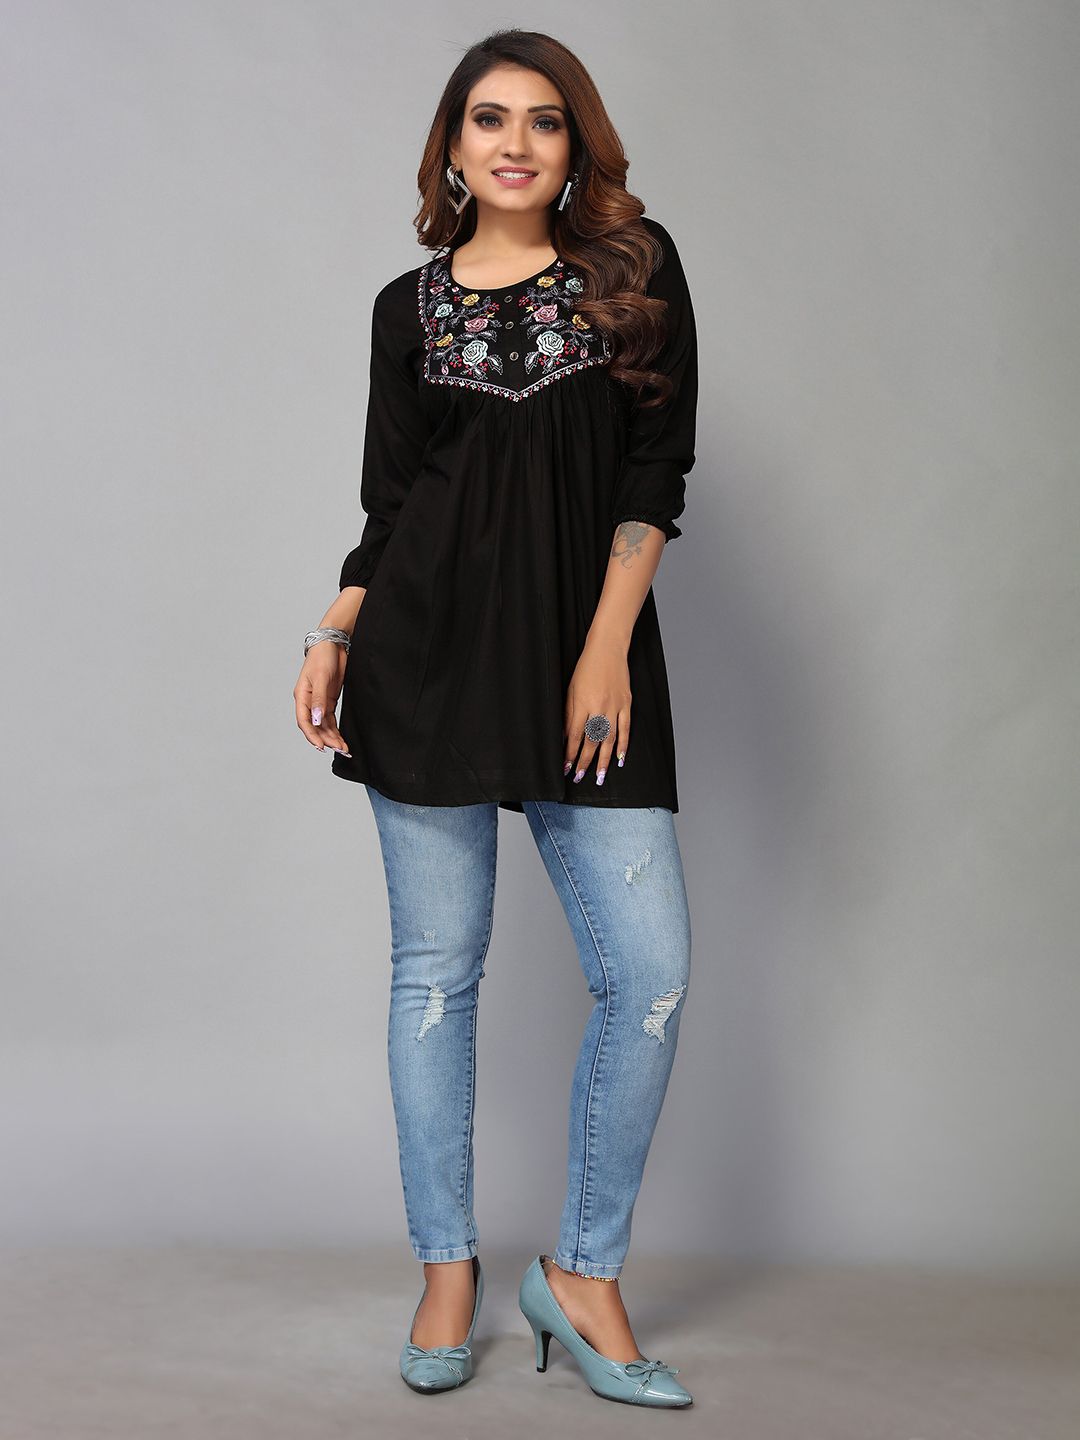 Nimayaa Floral Embroidered Longline Top Price in India